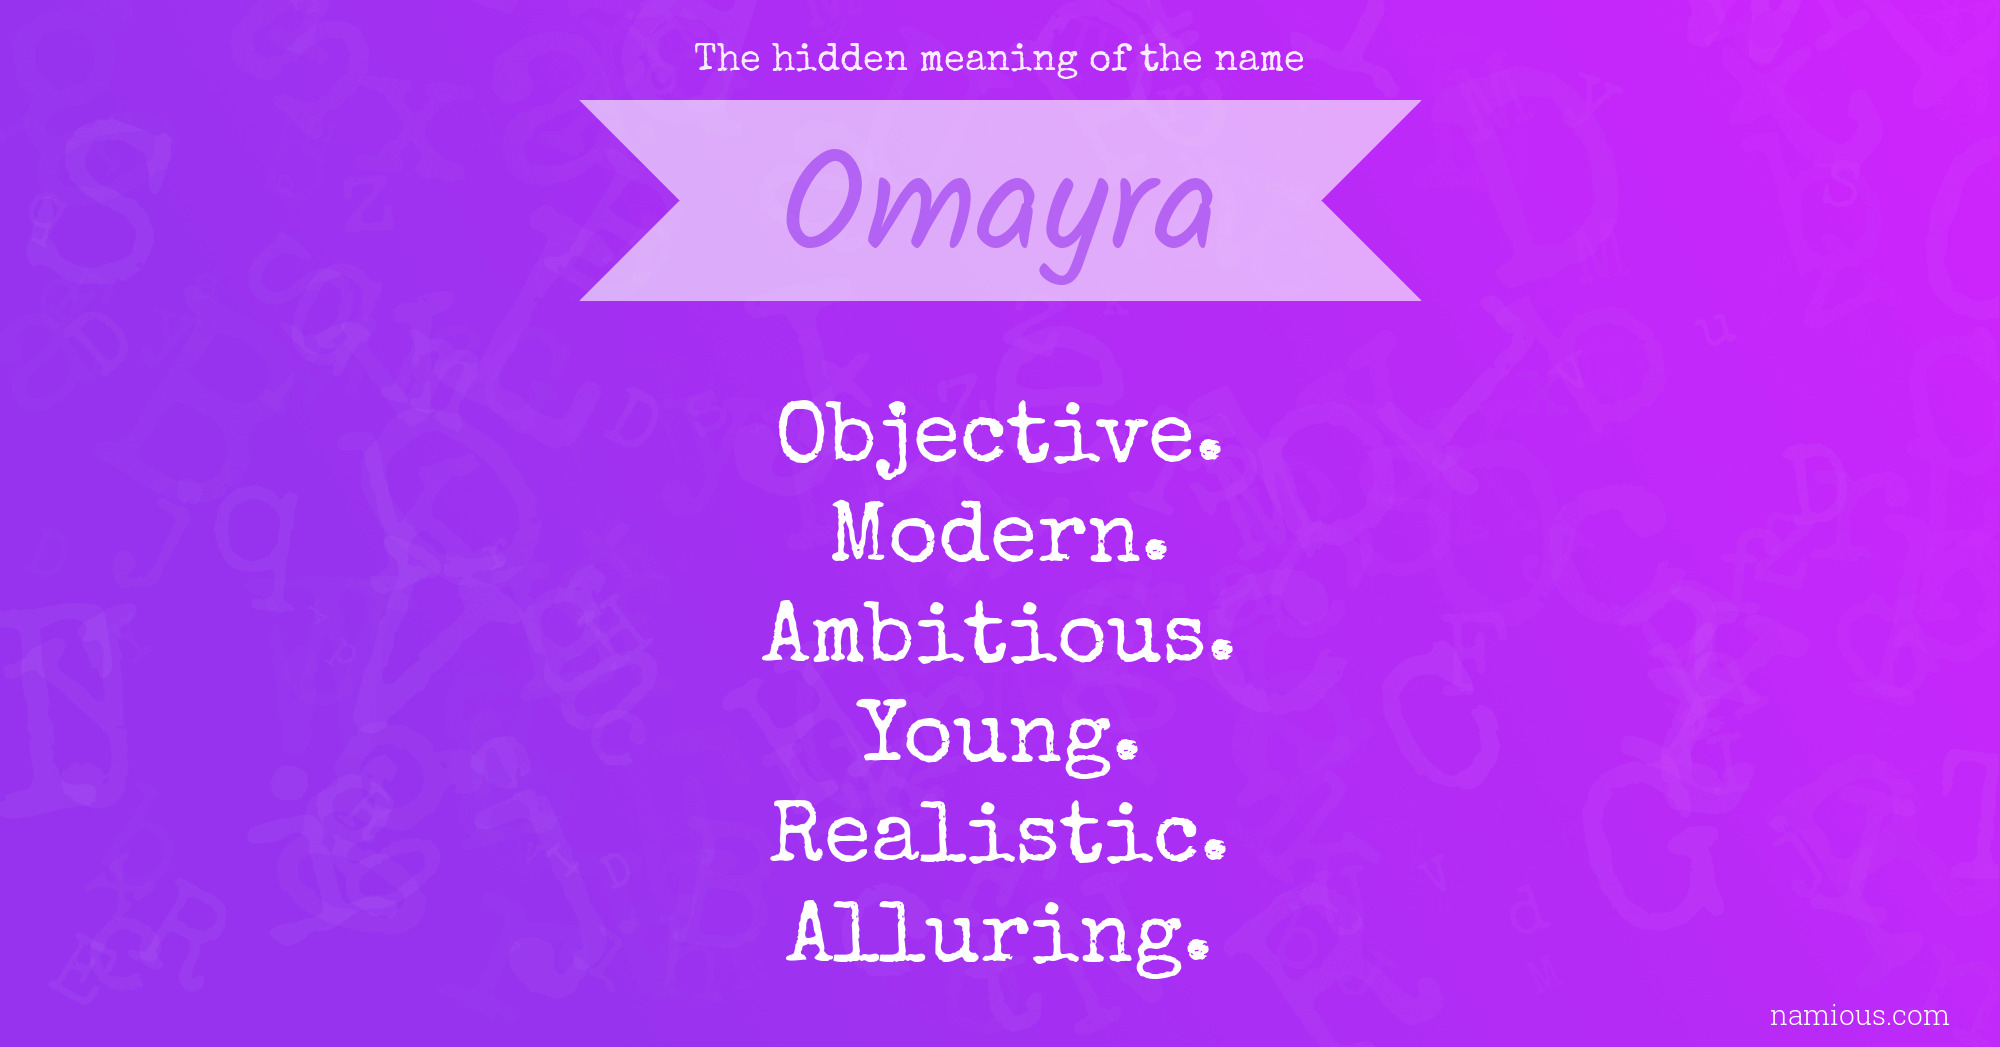 The hidden meaning of the name Omayra